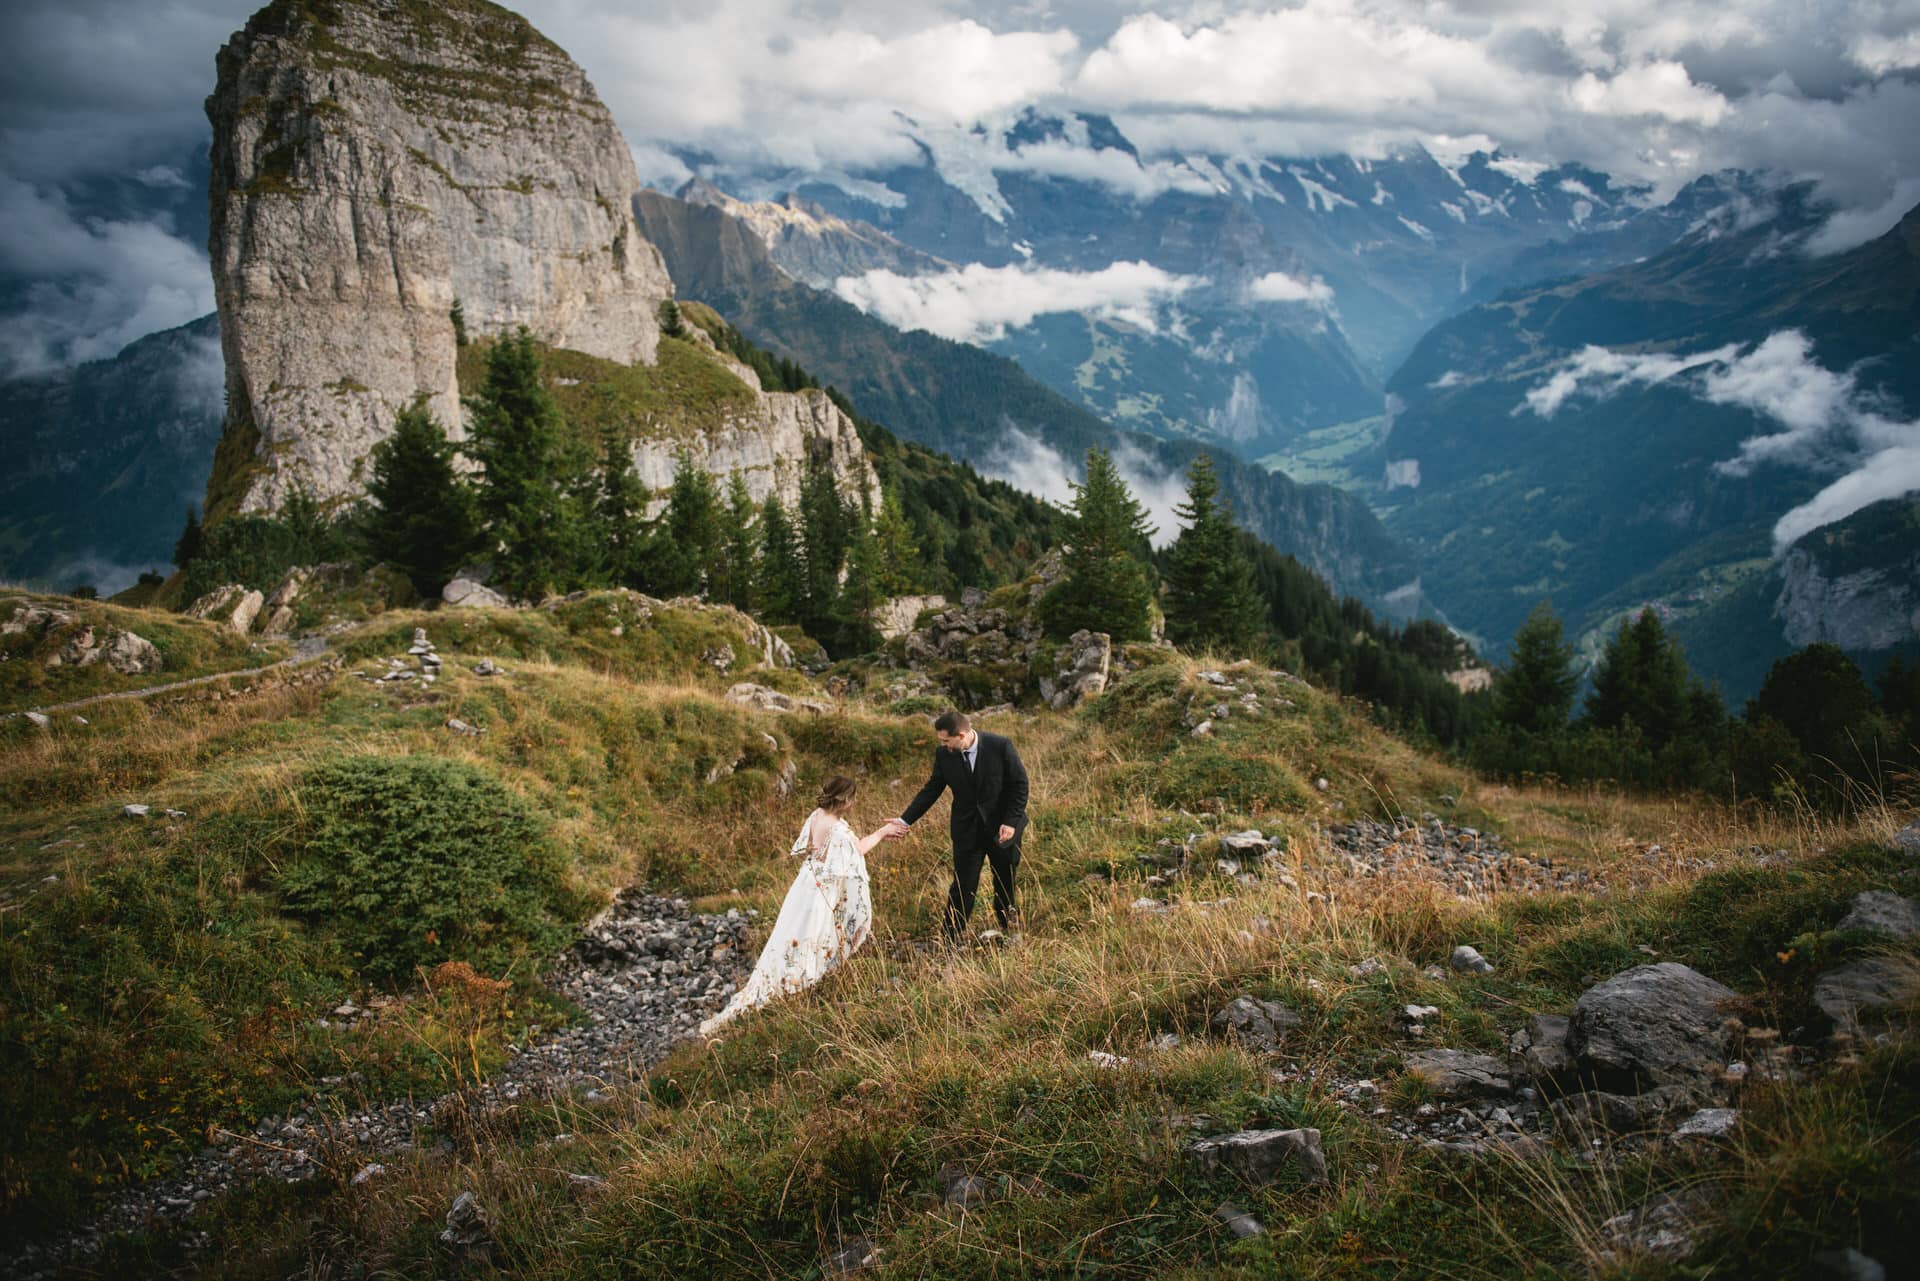 Couple walking in the mountains for an elopement photoshoot in Switzerland